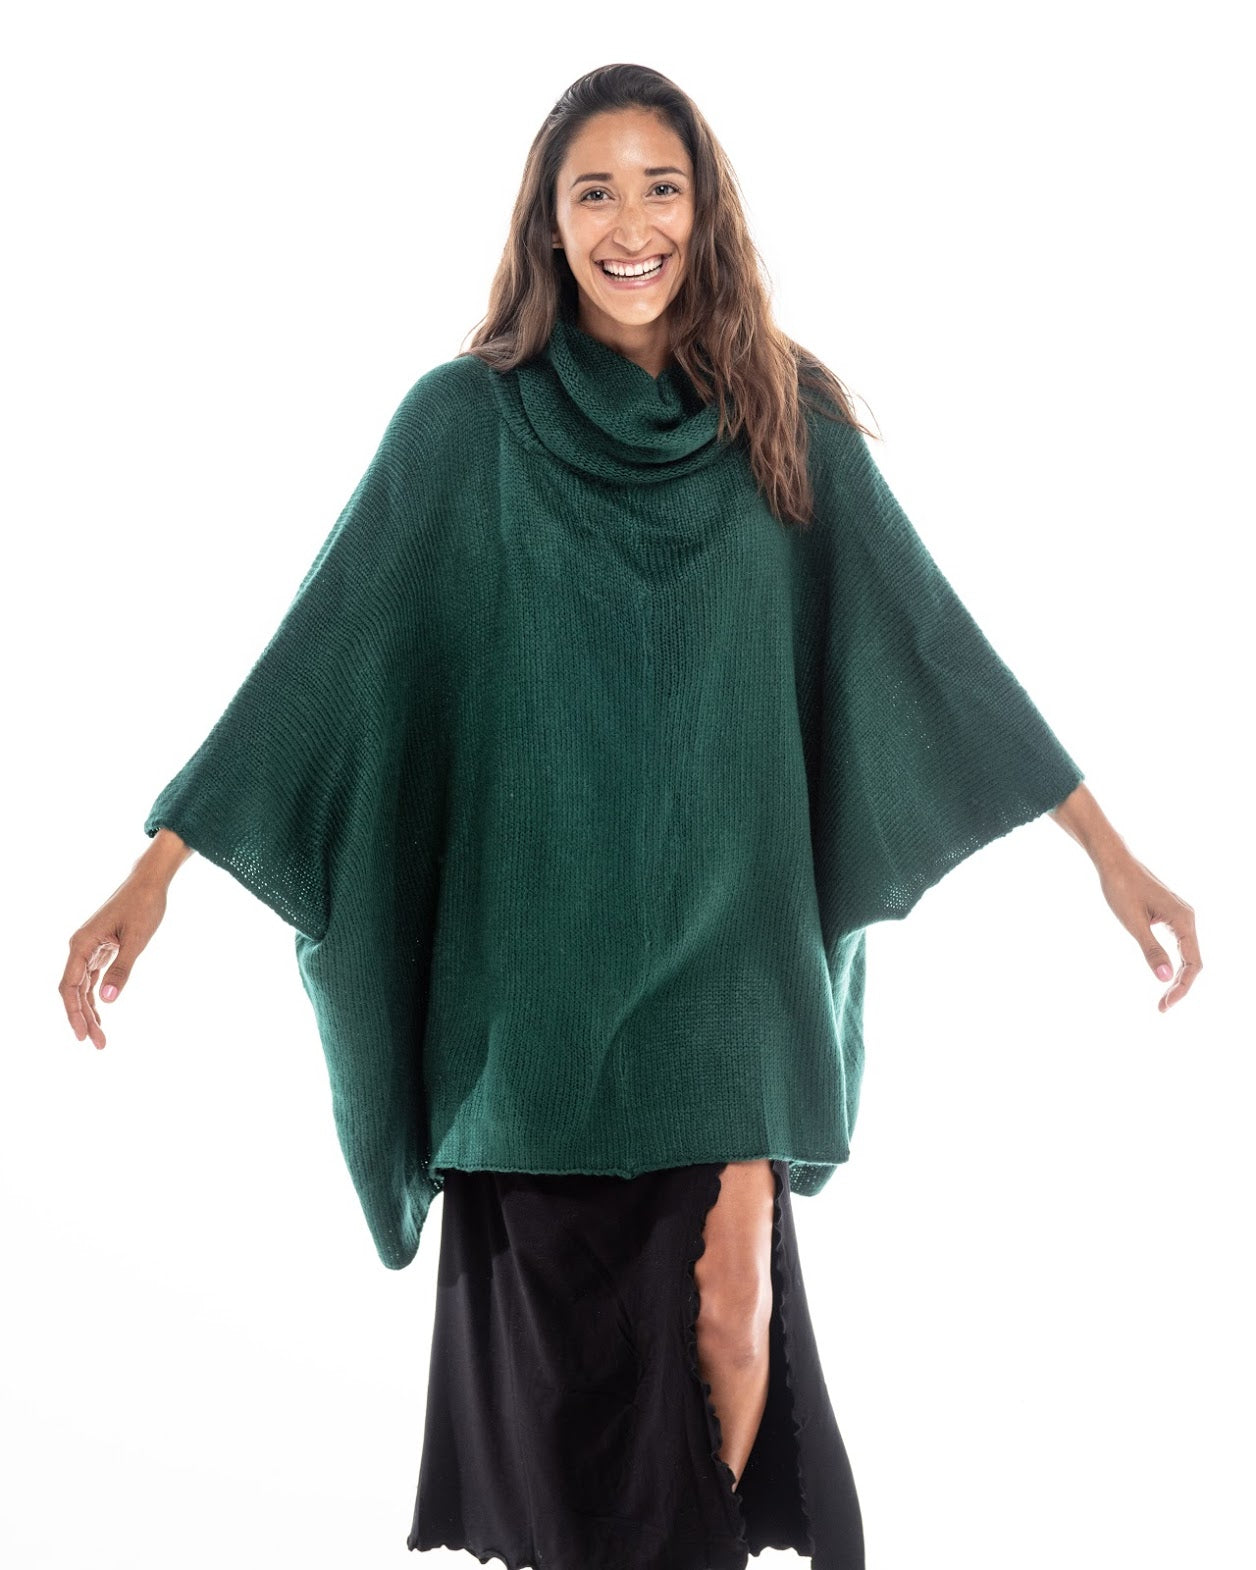 Knitted Square Design One Piece Poncho Pillow - Nectar Creations